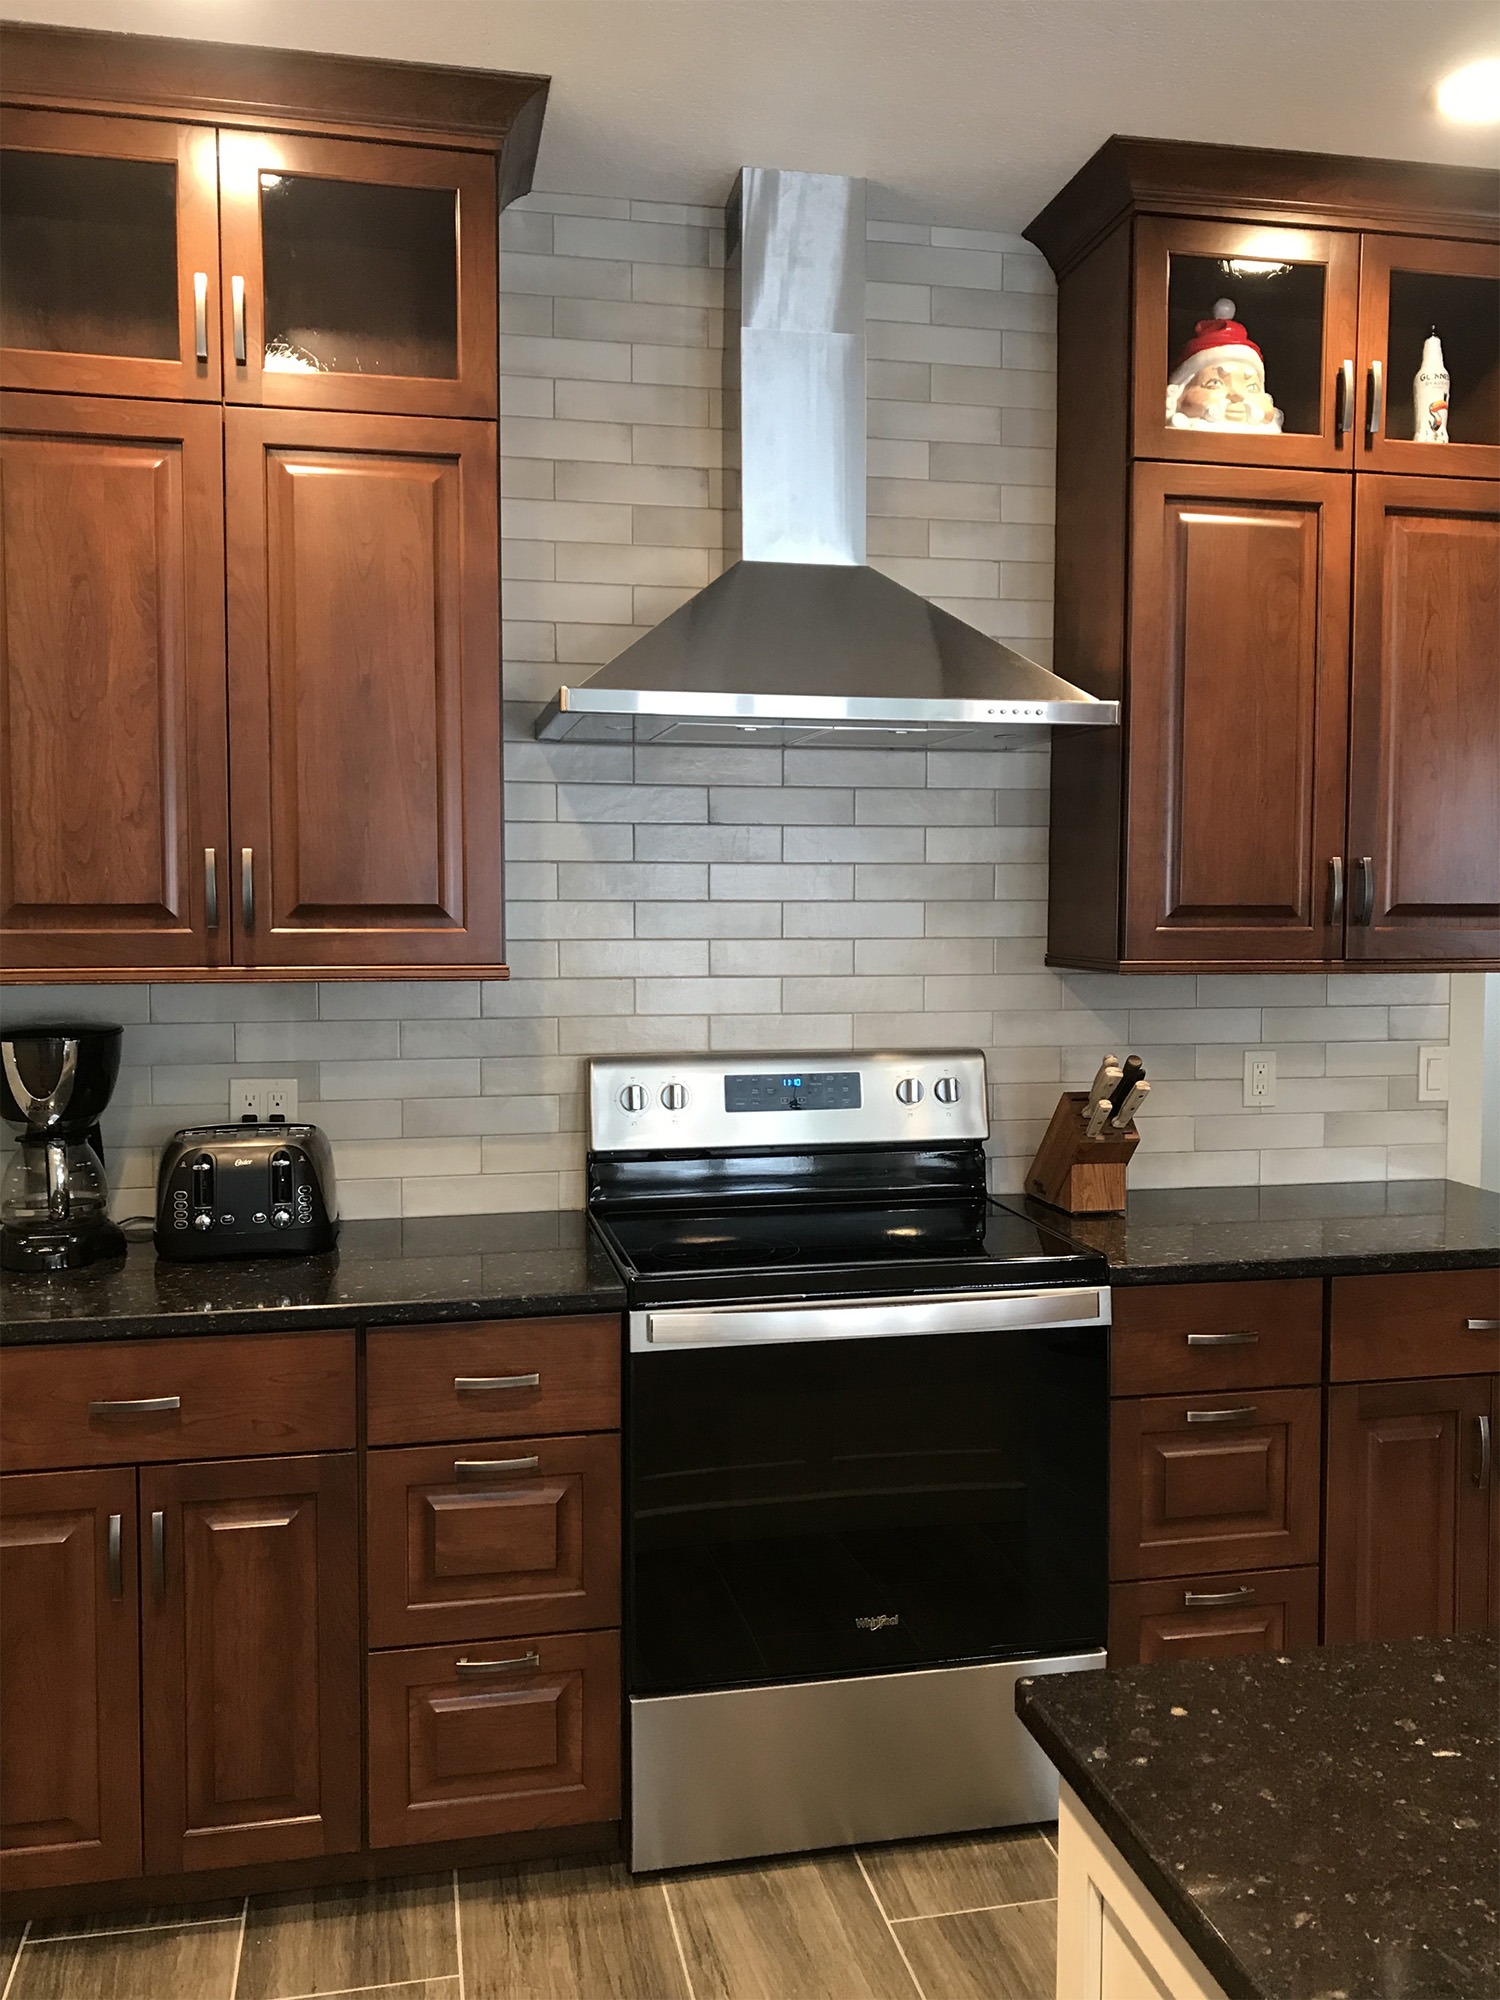 Wood kitchen cabinets with stainless hood and oven